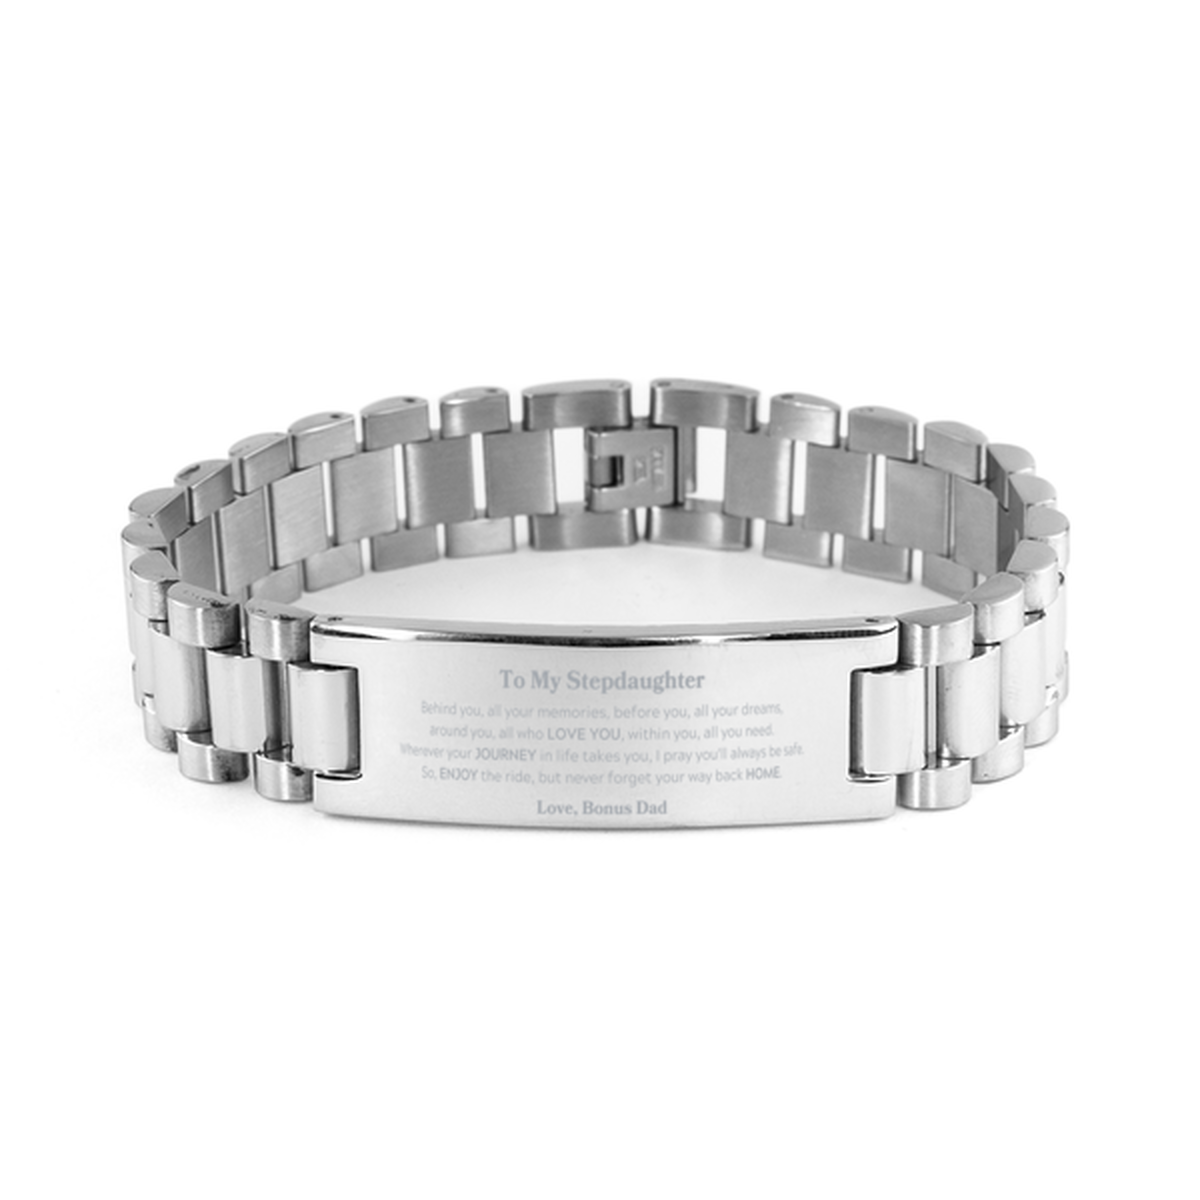 To My Stepdaughter Graduation Gifts from Bonus Dad, Stepdaughter Ladder Stainless Steel Bracelet Christmas Birthday Gifts for Stepdaughter Behind you, all your memories, before you, all your dreams. Love, Bonus Dad